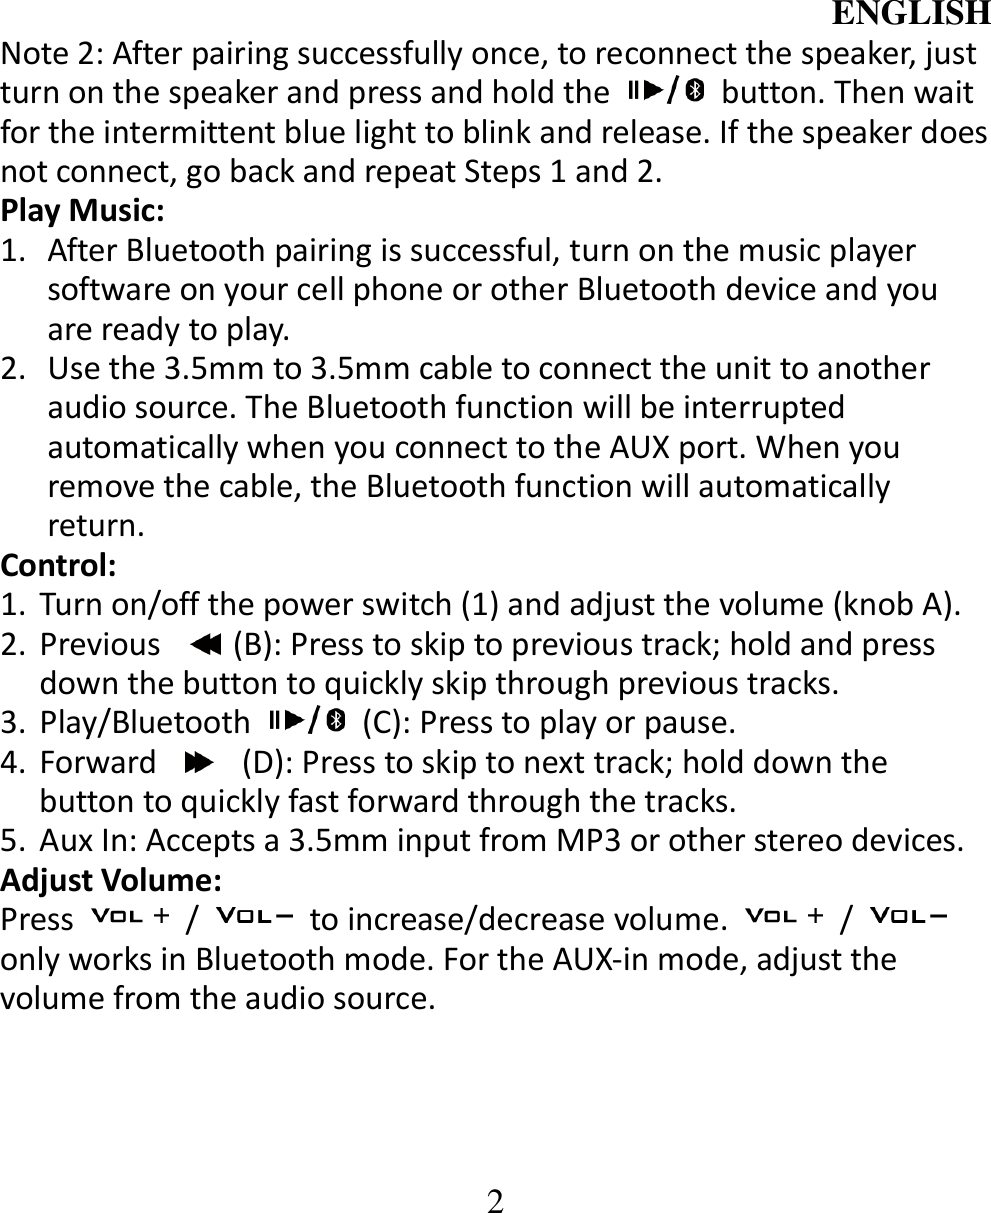 ENGLISH  2 Note 2: After pairing successfully once, to reconnect the speaker, just turn on the speaker and press and hold the    button. Then wait for the intermittent blue light to blink and release. If the speaker does not connect, go back and repeat Steps 1 and 2.   Play Music:   1. After Bluetooth pairing is successful, turn on the music player software on your cell phone or other Bluetooth device and you are ready to play. 2. Use the 3.5mm to 3.5mm cable to connect the unit to another audio source. The Bluetooth function will be interrupted automatically when you connect to the AUX port. When you remove the cable, the Bluetooth function will automatically return. Control: 1. Turn on/off the power switch (1) and adjust the volume (knob A). 2. Previous  (B): Press to skip to previous track; hold and press down the button to quickly skip through previous tracks. 3. Play/Bluetooth    (C): Press to play or pause. 4. Forward    (D): Press to skip to next track; hold down the button to quickly fast forward through the tracks.   5. Aux In: Accepts a 3.5mm input from MP3 or other stereo devices.   Adjust Volume:   Press    /    to increase/decrease volume.    /   only works in Bluetooth mode. For the AUX-in mode, adjust the volume from the audio source.   